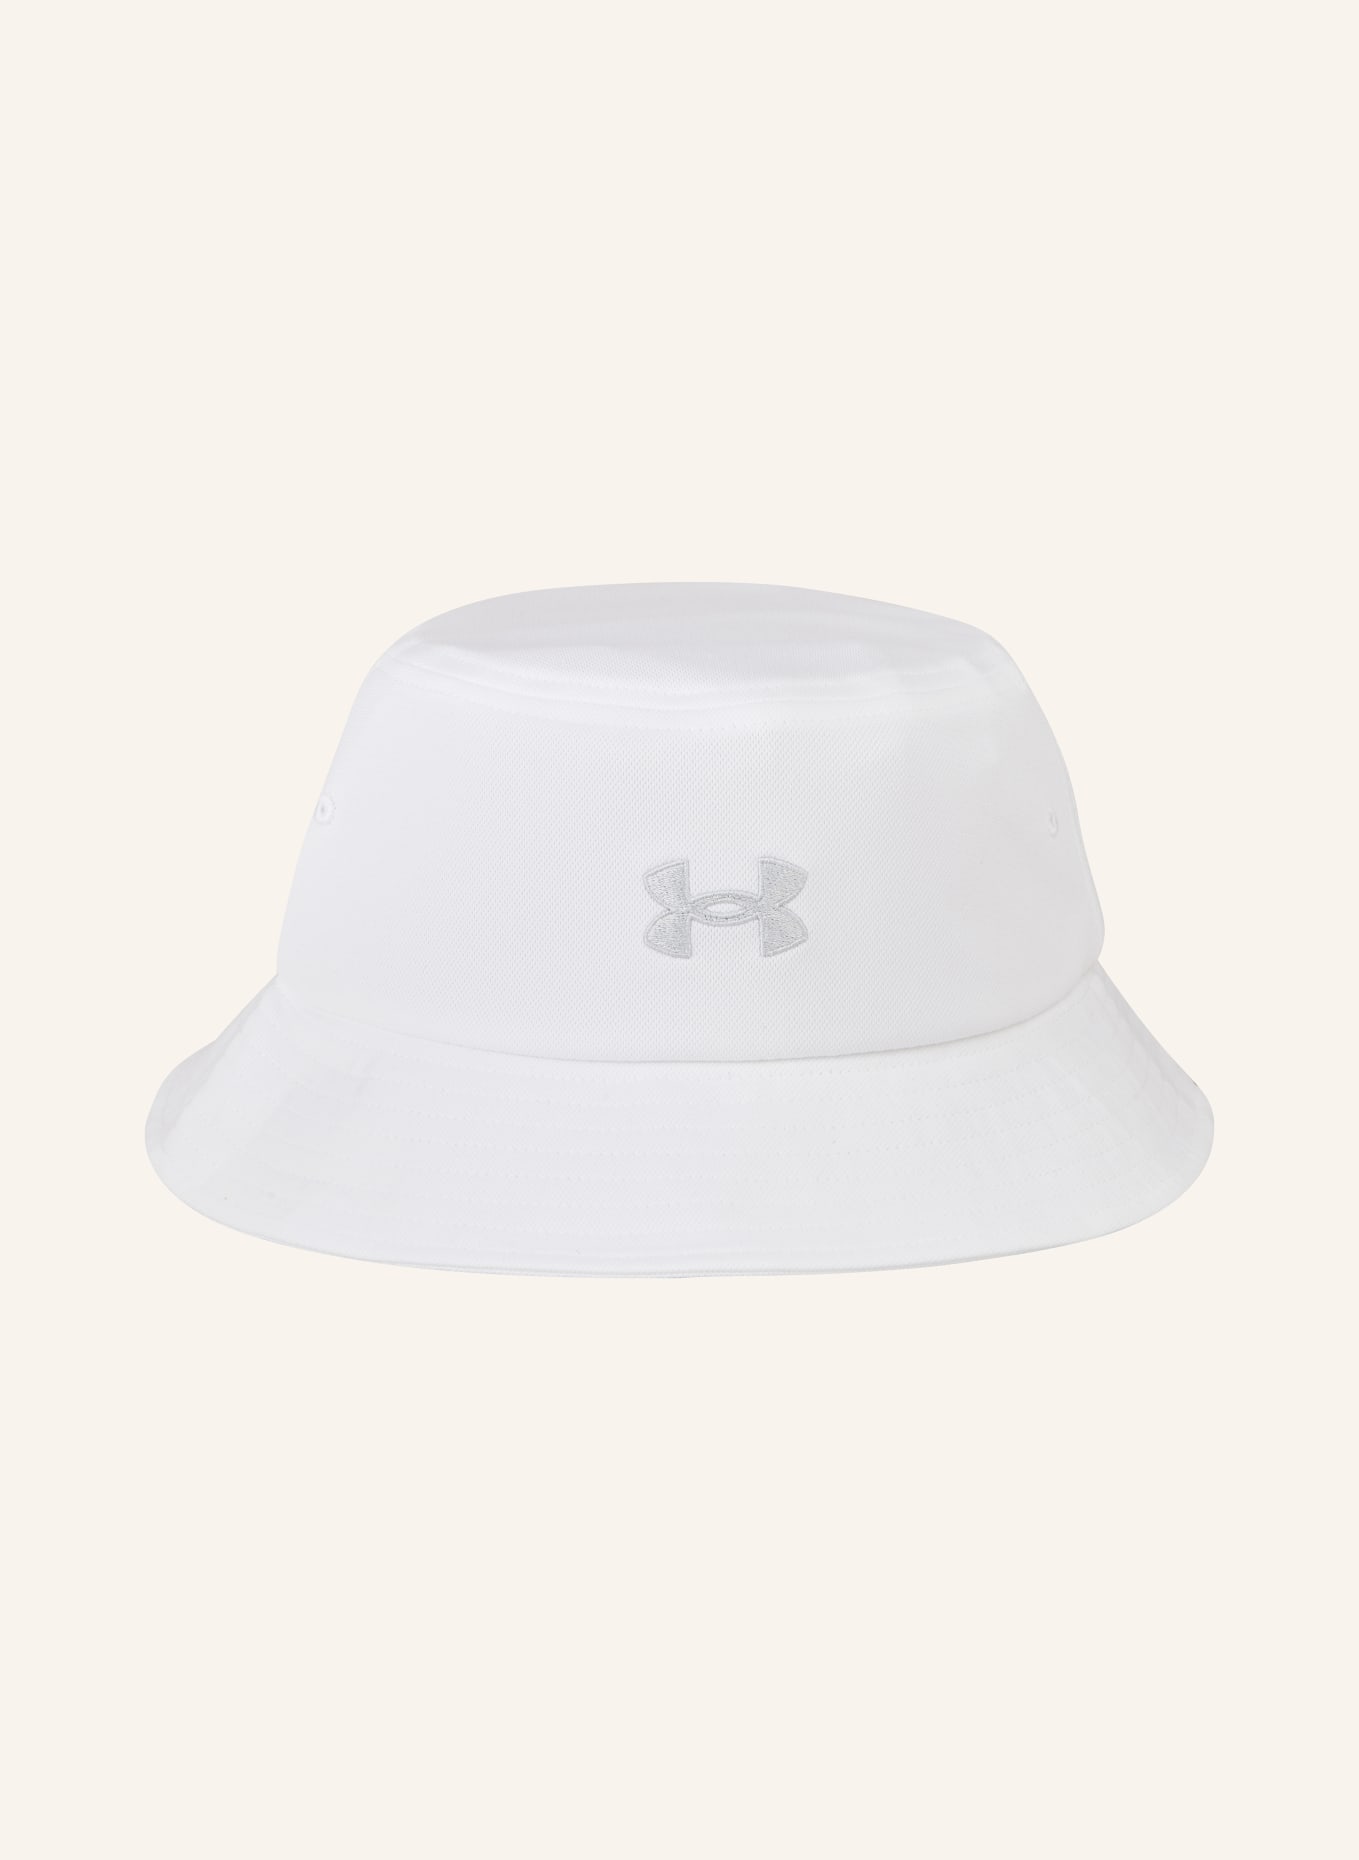 UNDER ARMOUR Bucket hat BLITZING, Color: WHITE (Image 2)